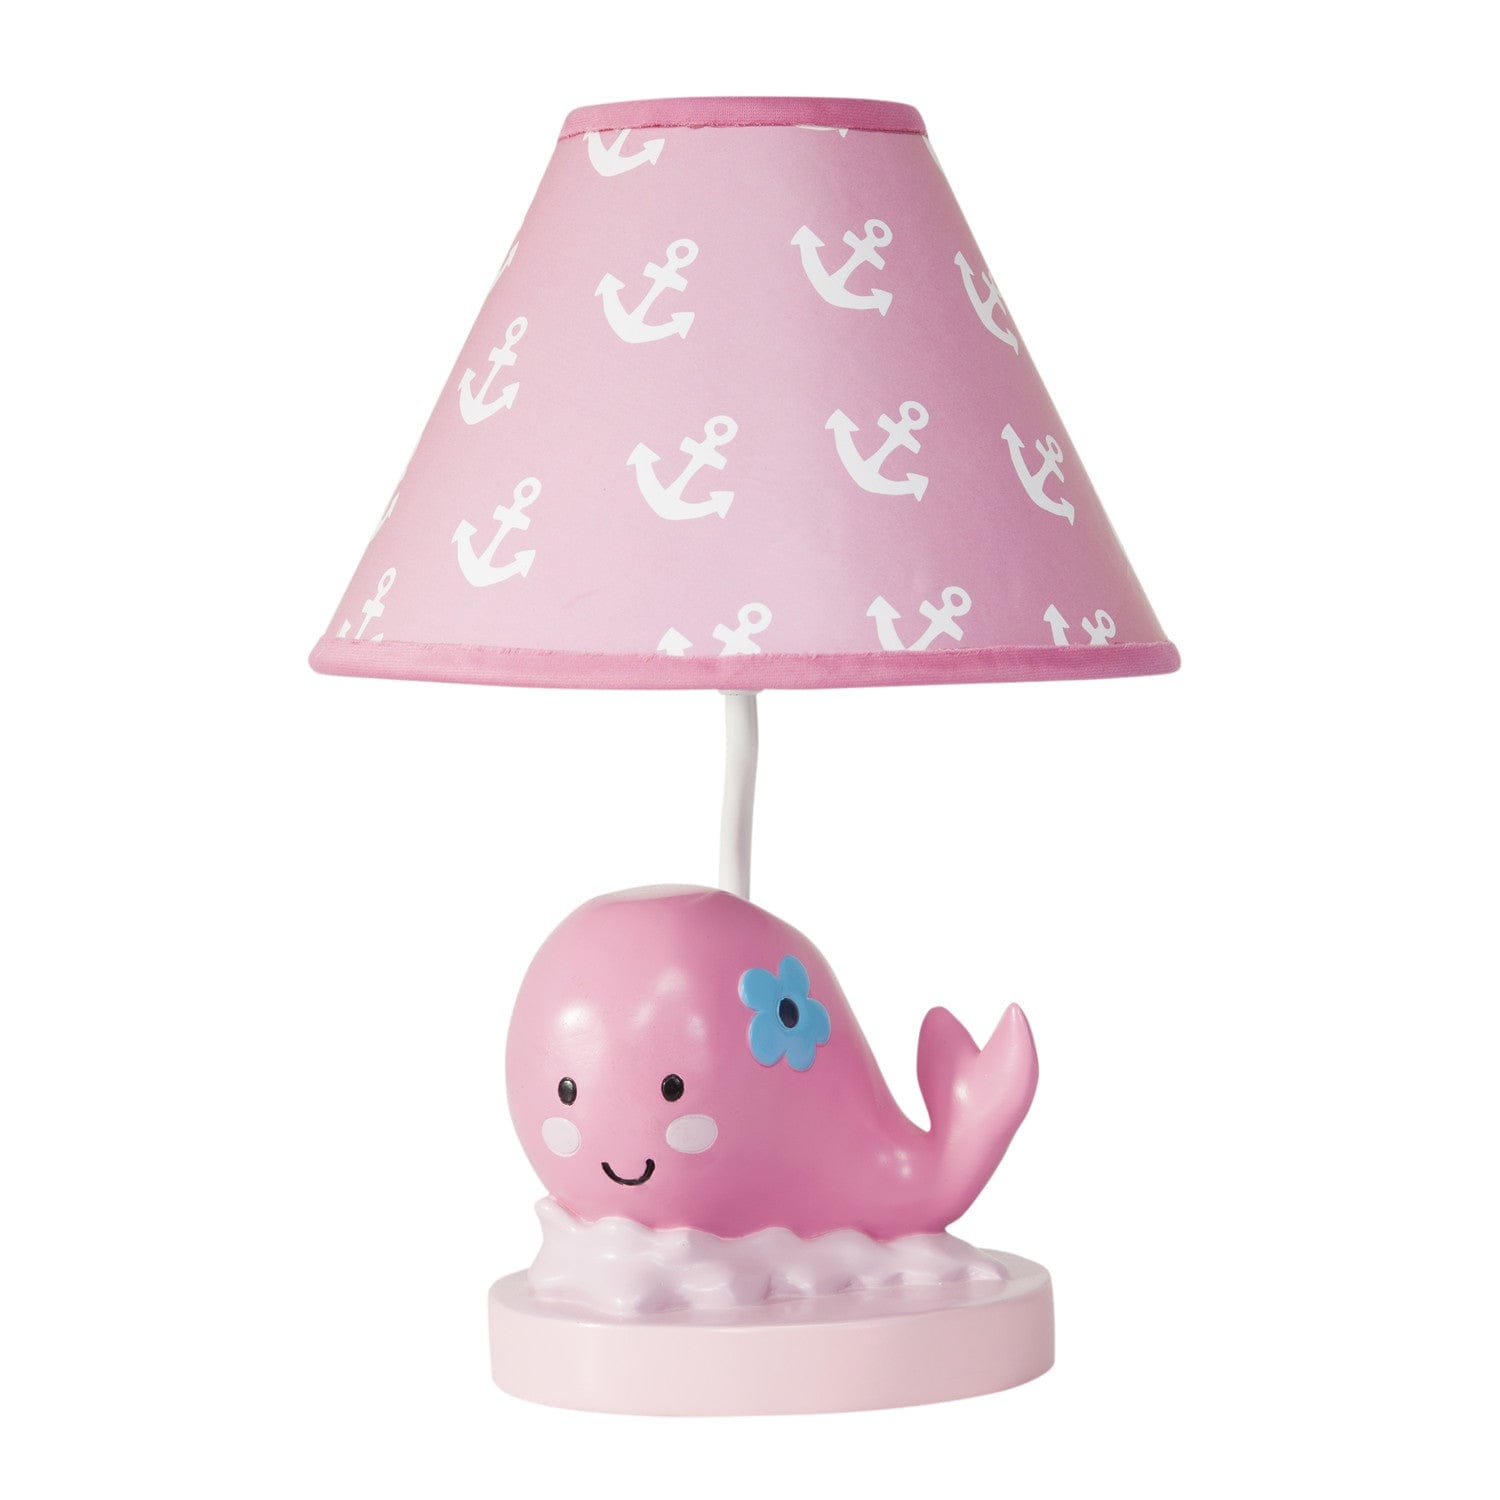 LAMBS & IVY  Lamp With Shade Splish Splash: Pink Shade with Anchor Prints to coordinate with Whale Shaped Base and energy efficient light bulb - 580024B